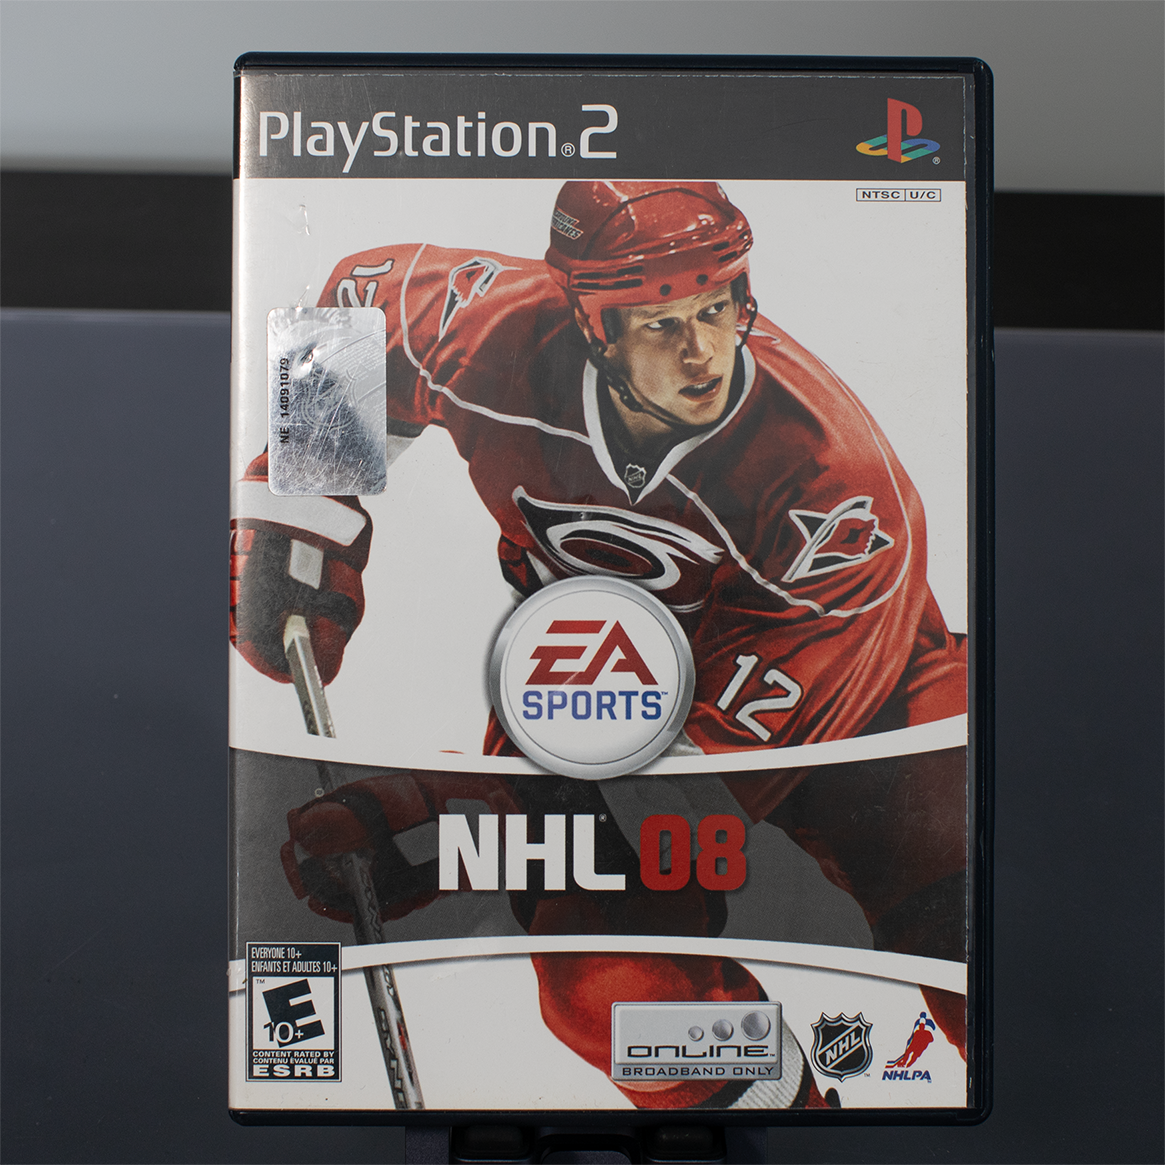 NHL08 - PS2 Game